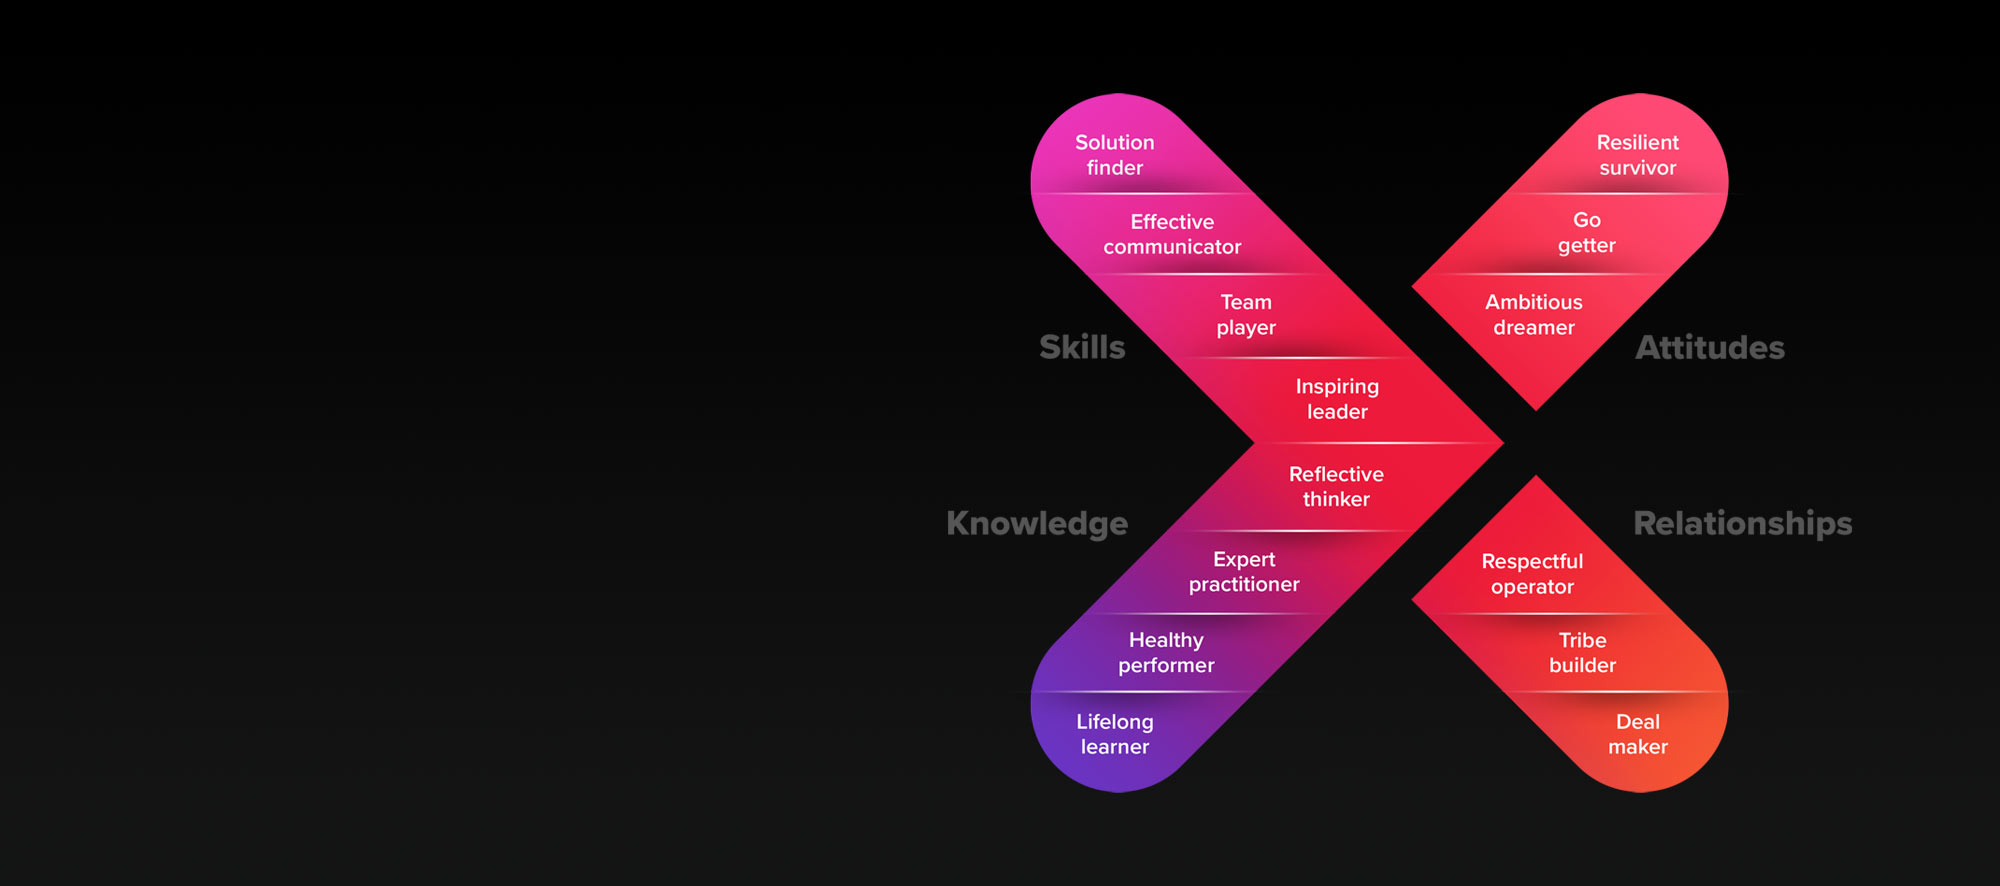 A screenshot of the X model of Success, labelled with Skills, Attitudes, Knowledge and Relationships